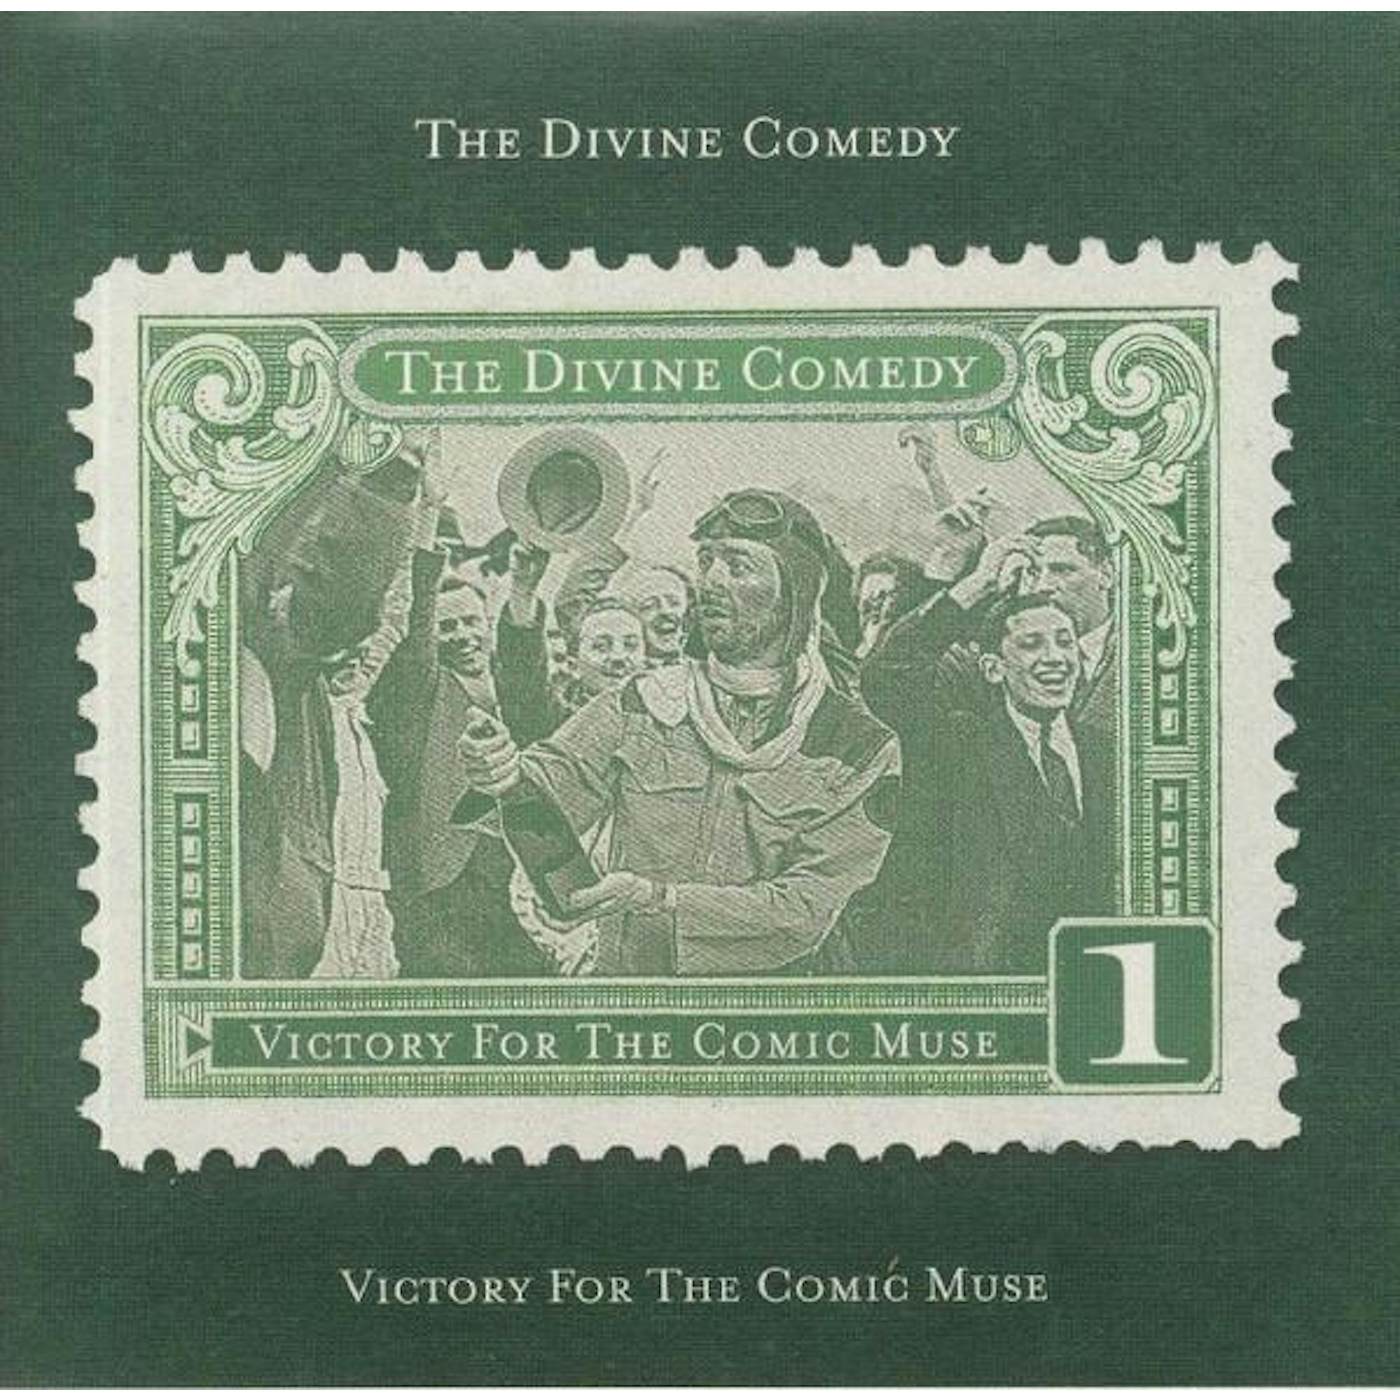 The Divine Comedy VICTORY FOR THE COMIC MUSE CD